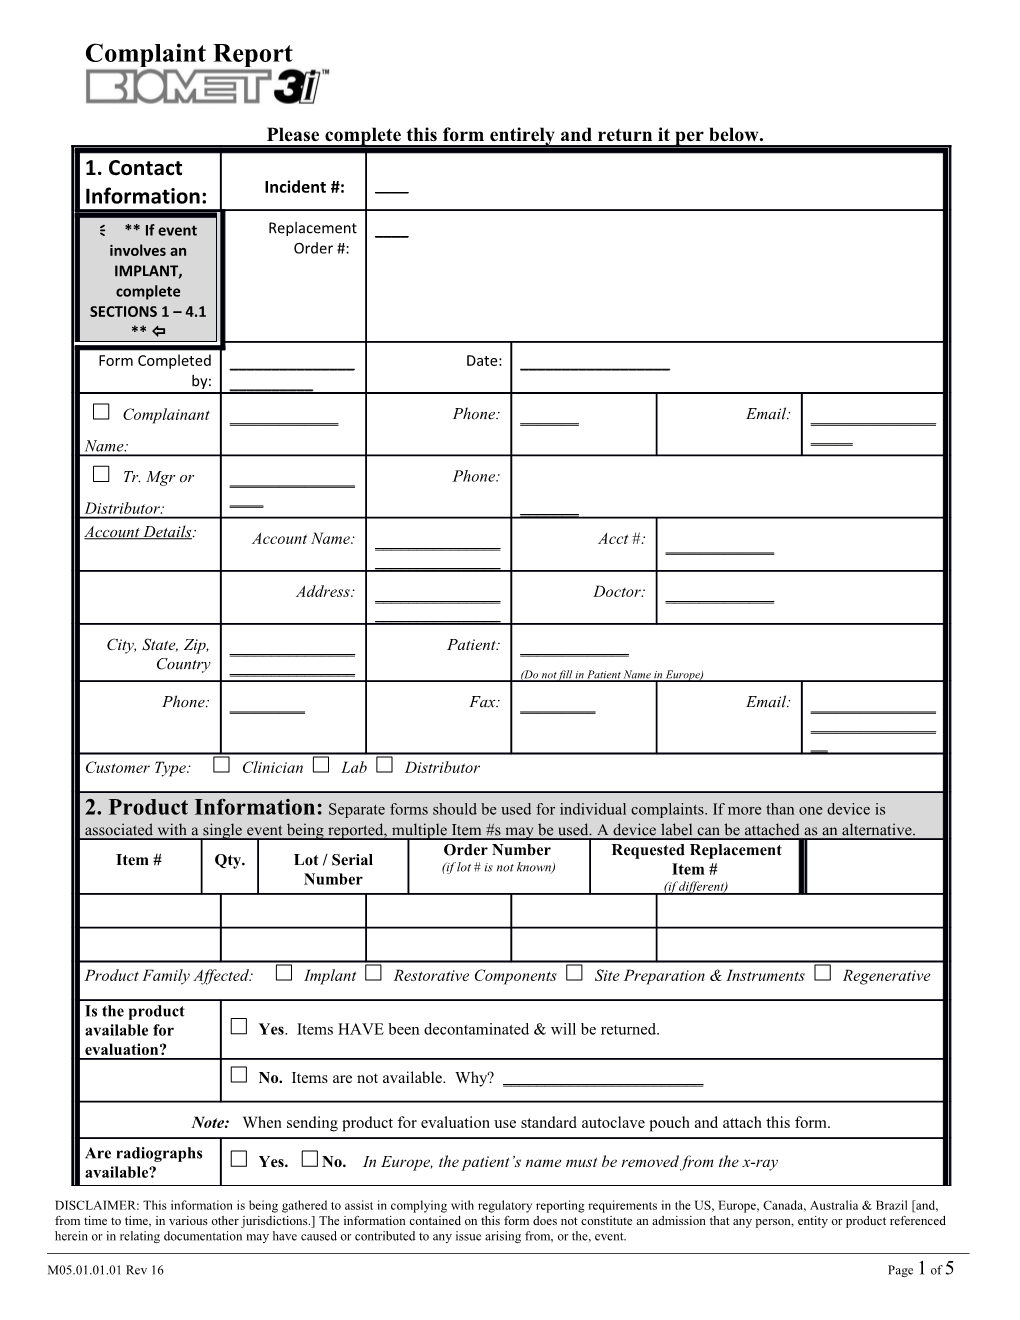 Please Complete This Form Entirely and Return It Per Below